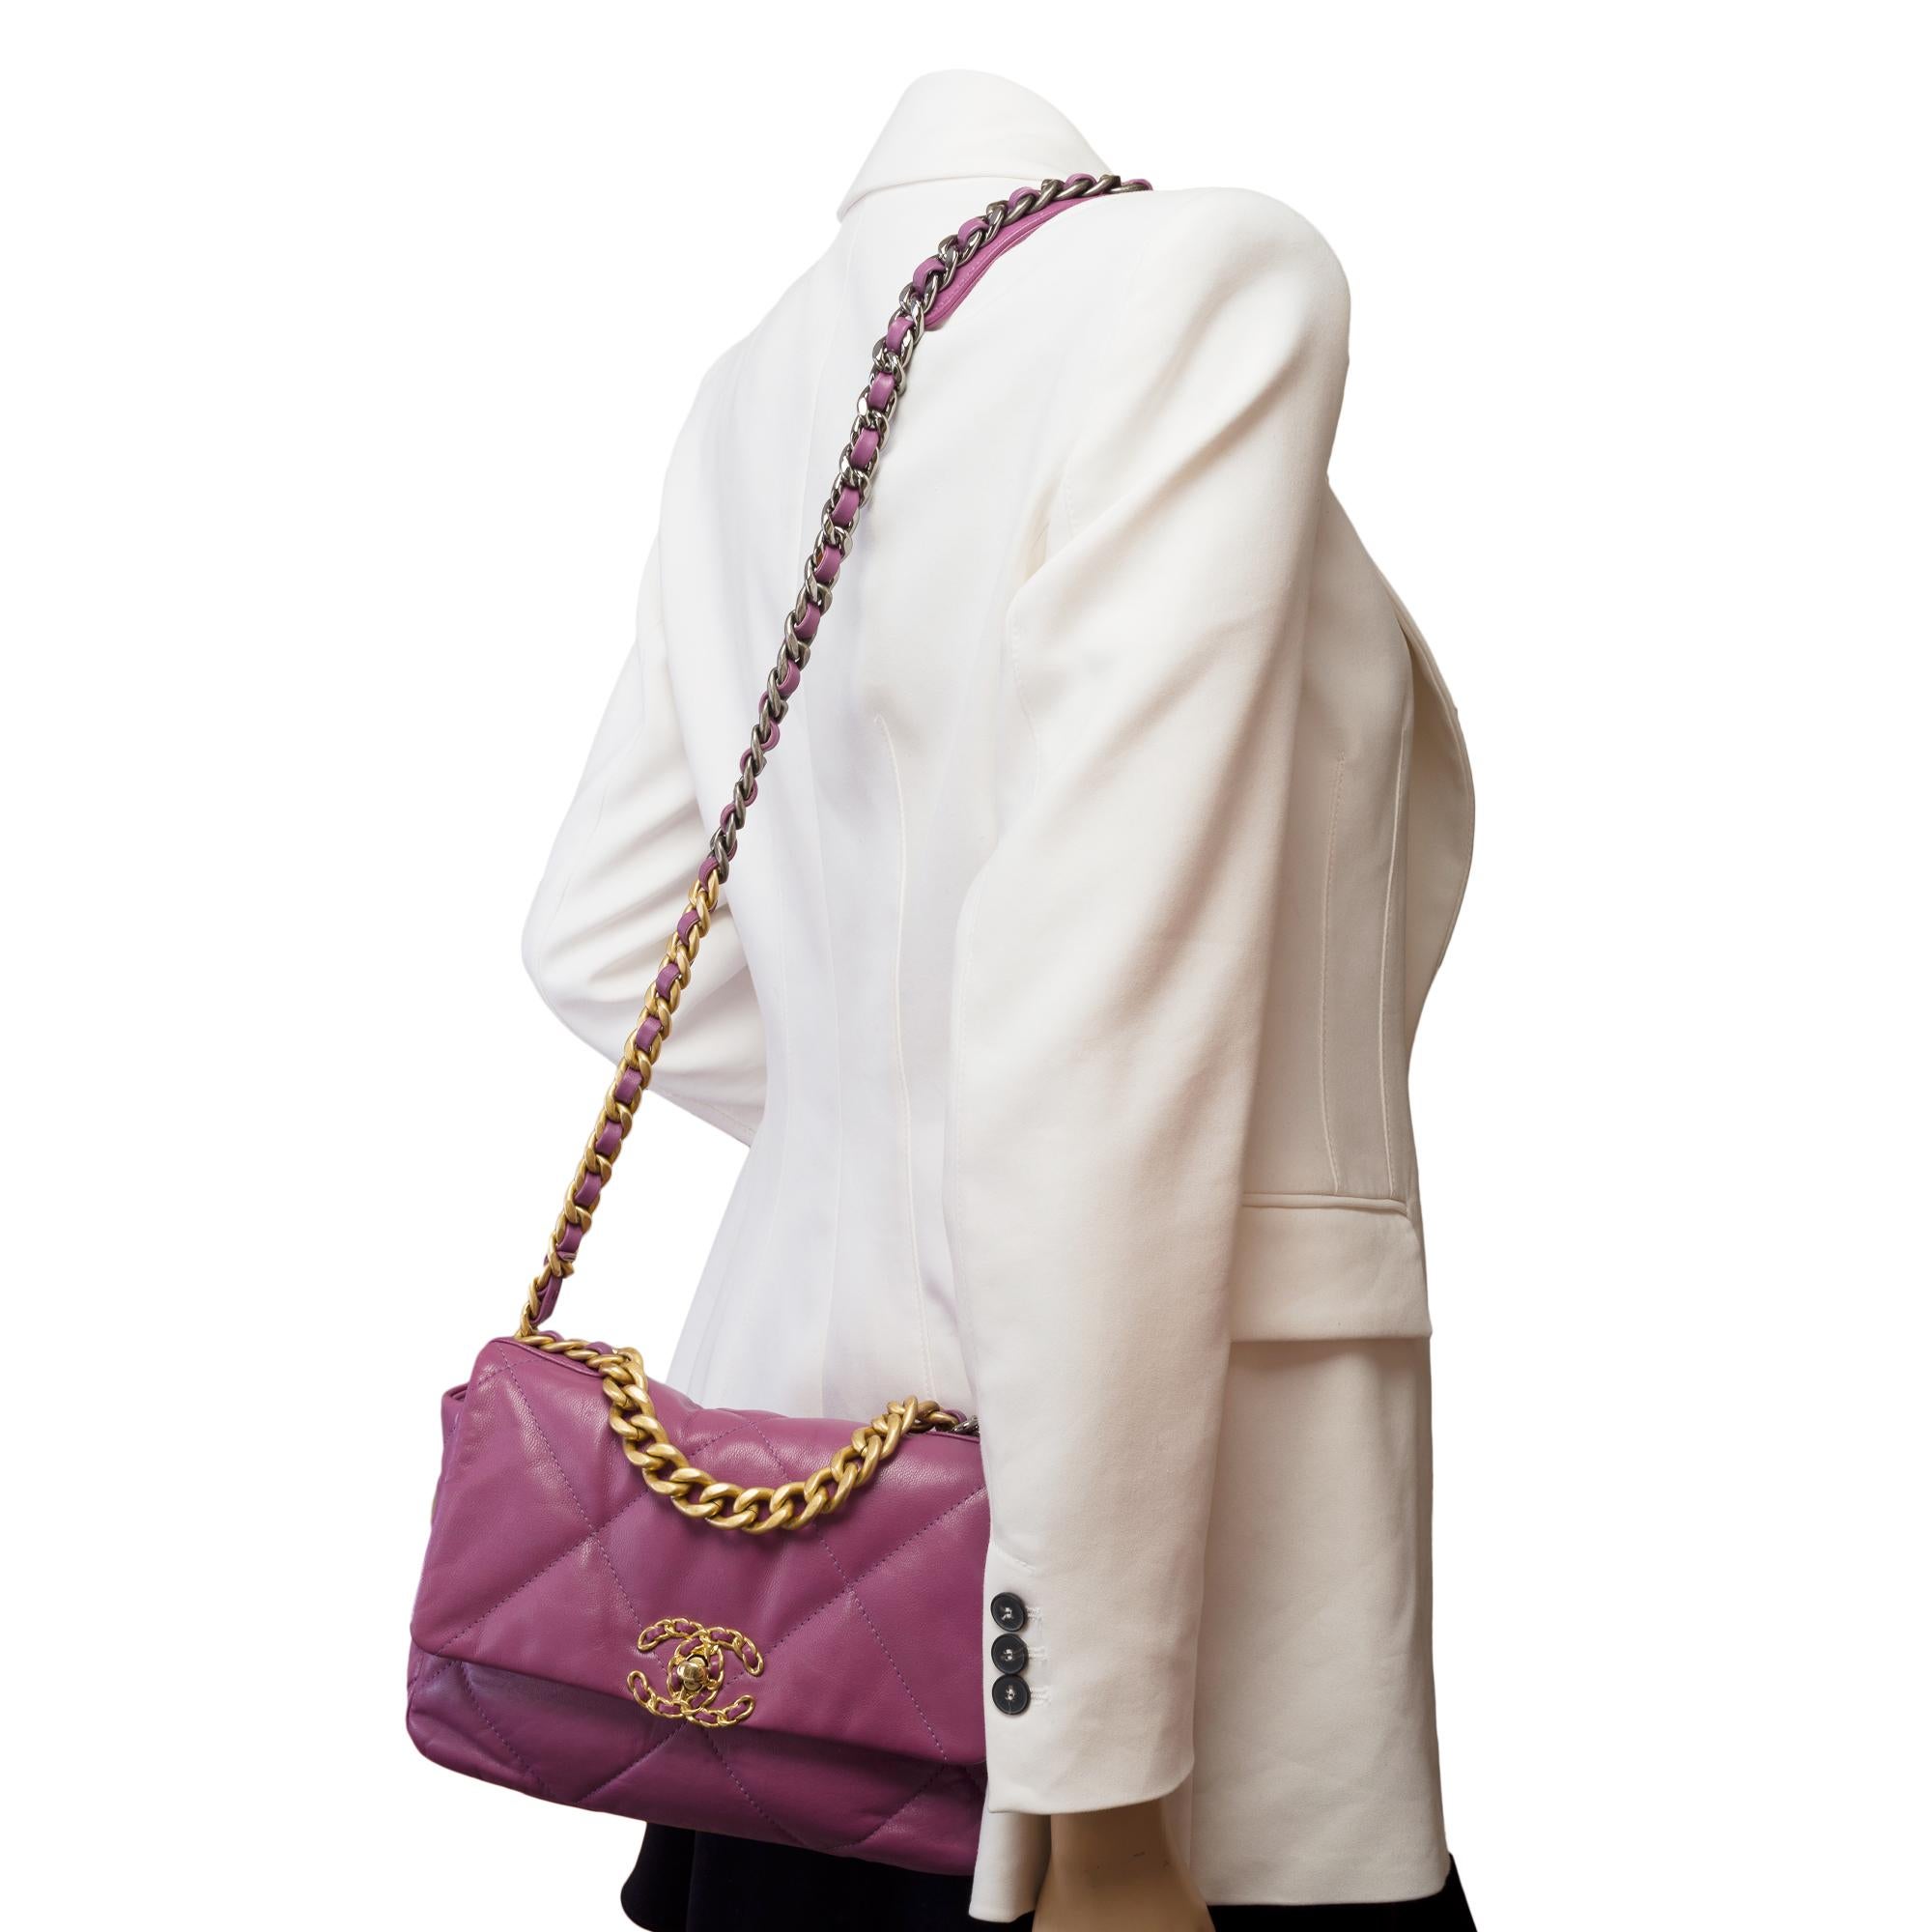 Stunning Chanel 19 shoulder bag in purple quilted leather , Matt gold and SHW For Sale 9